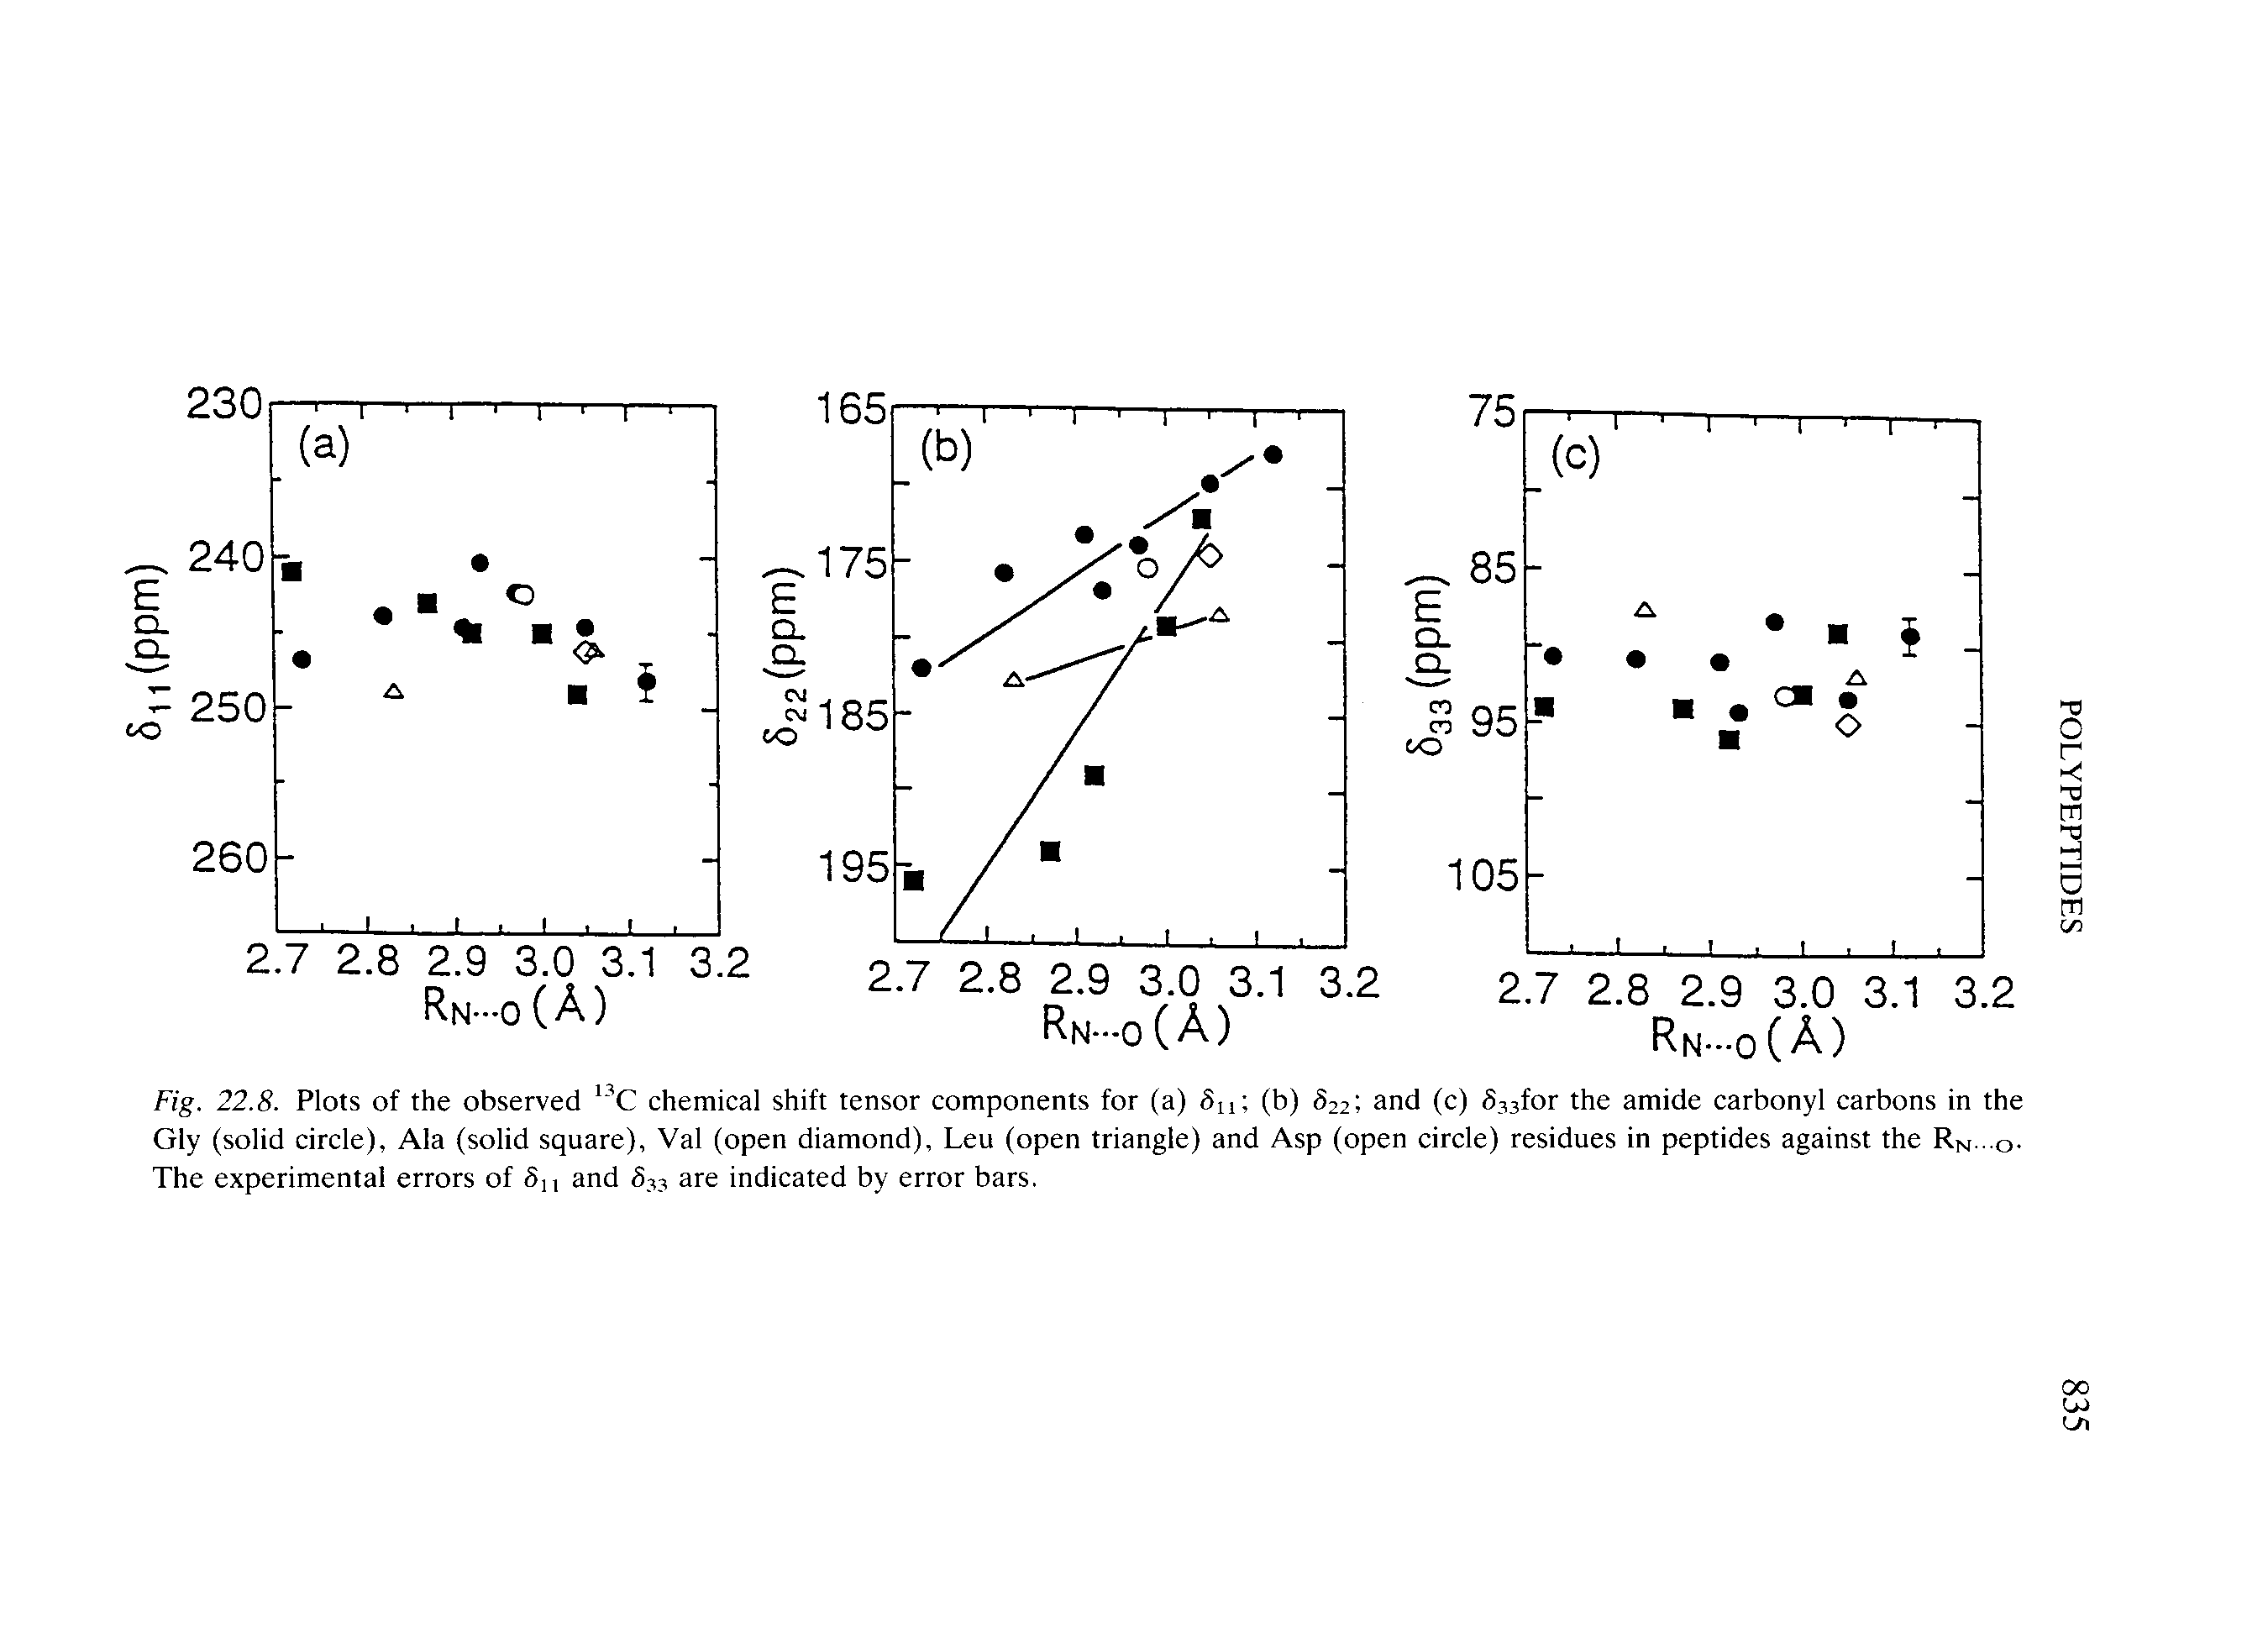 Fig. 22.8. Plots of the observed chemical shift tensor components for (a) 6u (b) 822, and (c) 533for the amide carbonyl carbons in the Gly (solid circle), Ala (solid square), Val (open diamond), Leu (open triangle) and Asp (open circle) residues in peptides against the Rw o-The experimental errors of 5n and 633 are indicated by error bars.